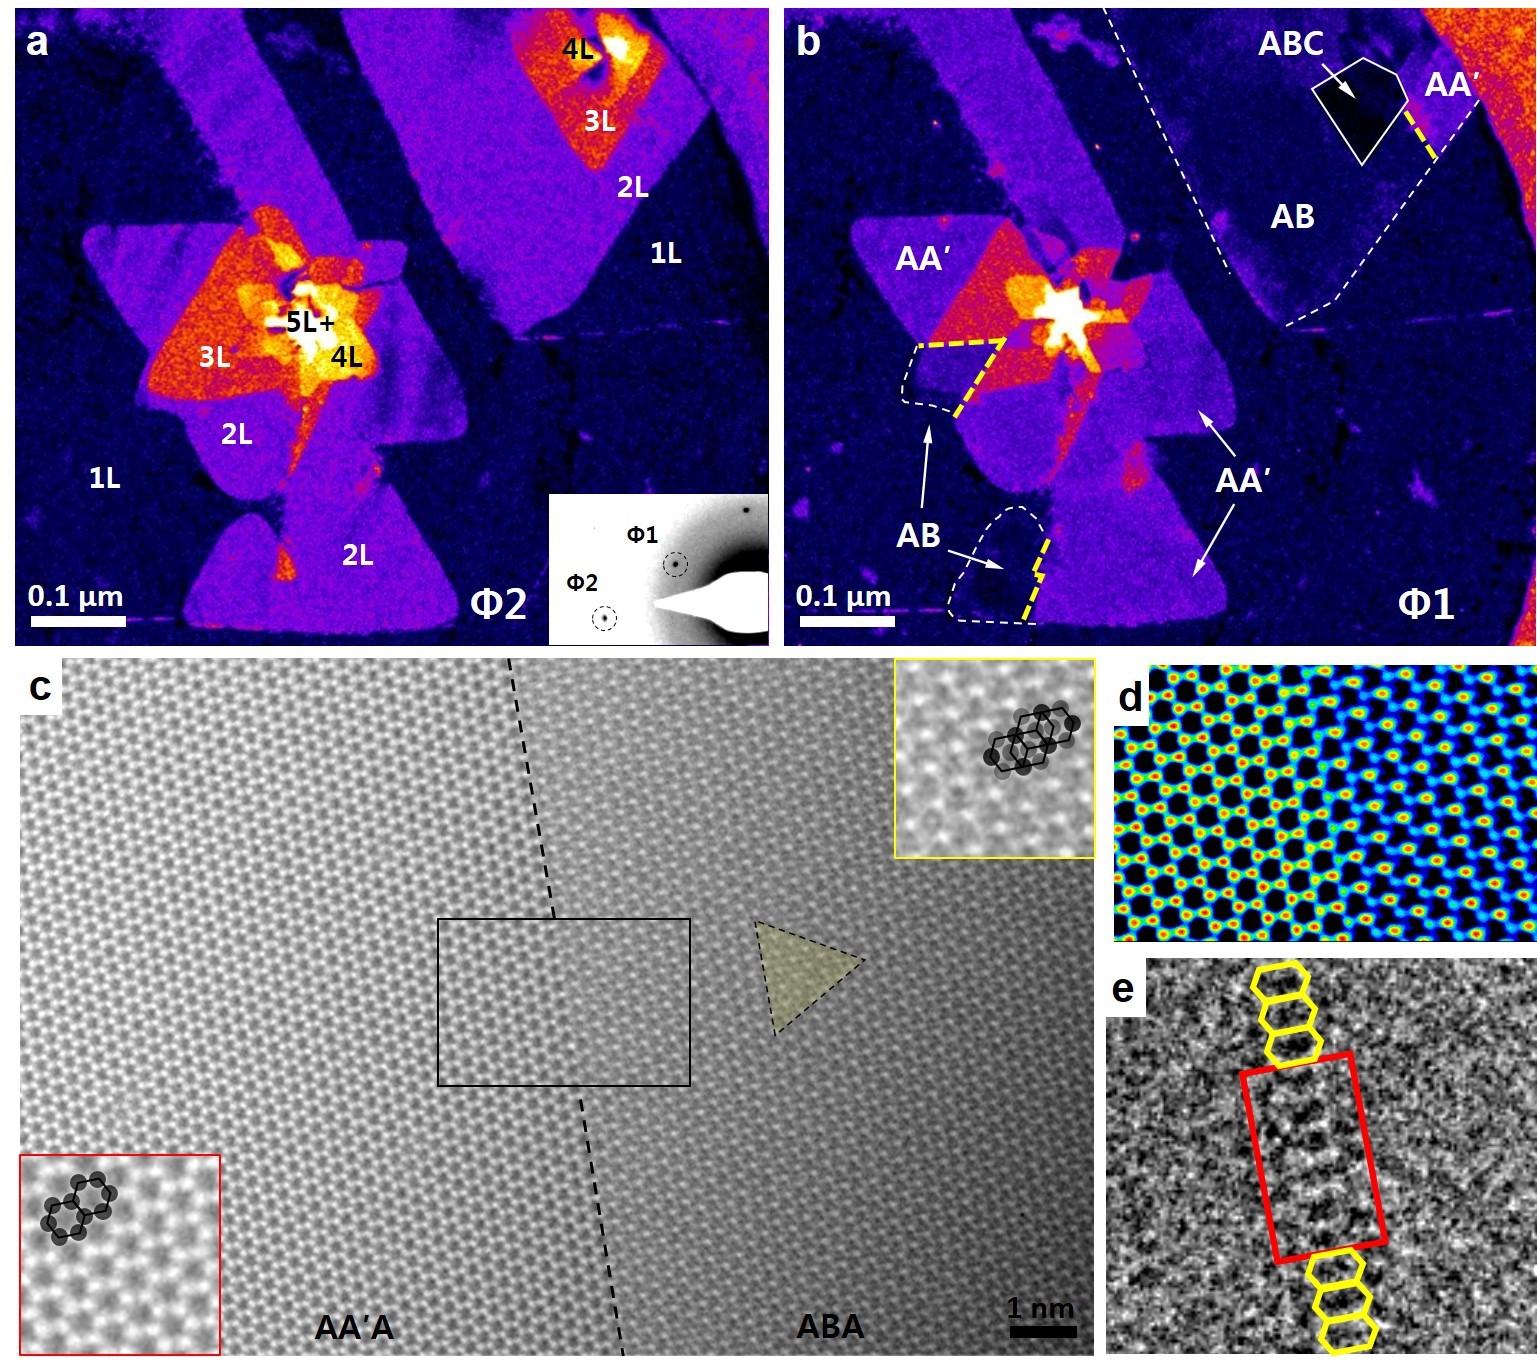 Figure 3. Transmission electron microscopy images of few-layer hexagonal boron nitride with atomically sharp AA'/AB stacking boundaries. The zero bandgap channels between AA′ and AB are indicated with yellow dashed lines in (b), and represented at high resolution also in (c), (d) and (e).